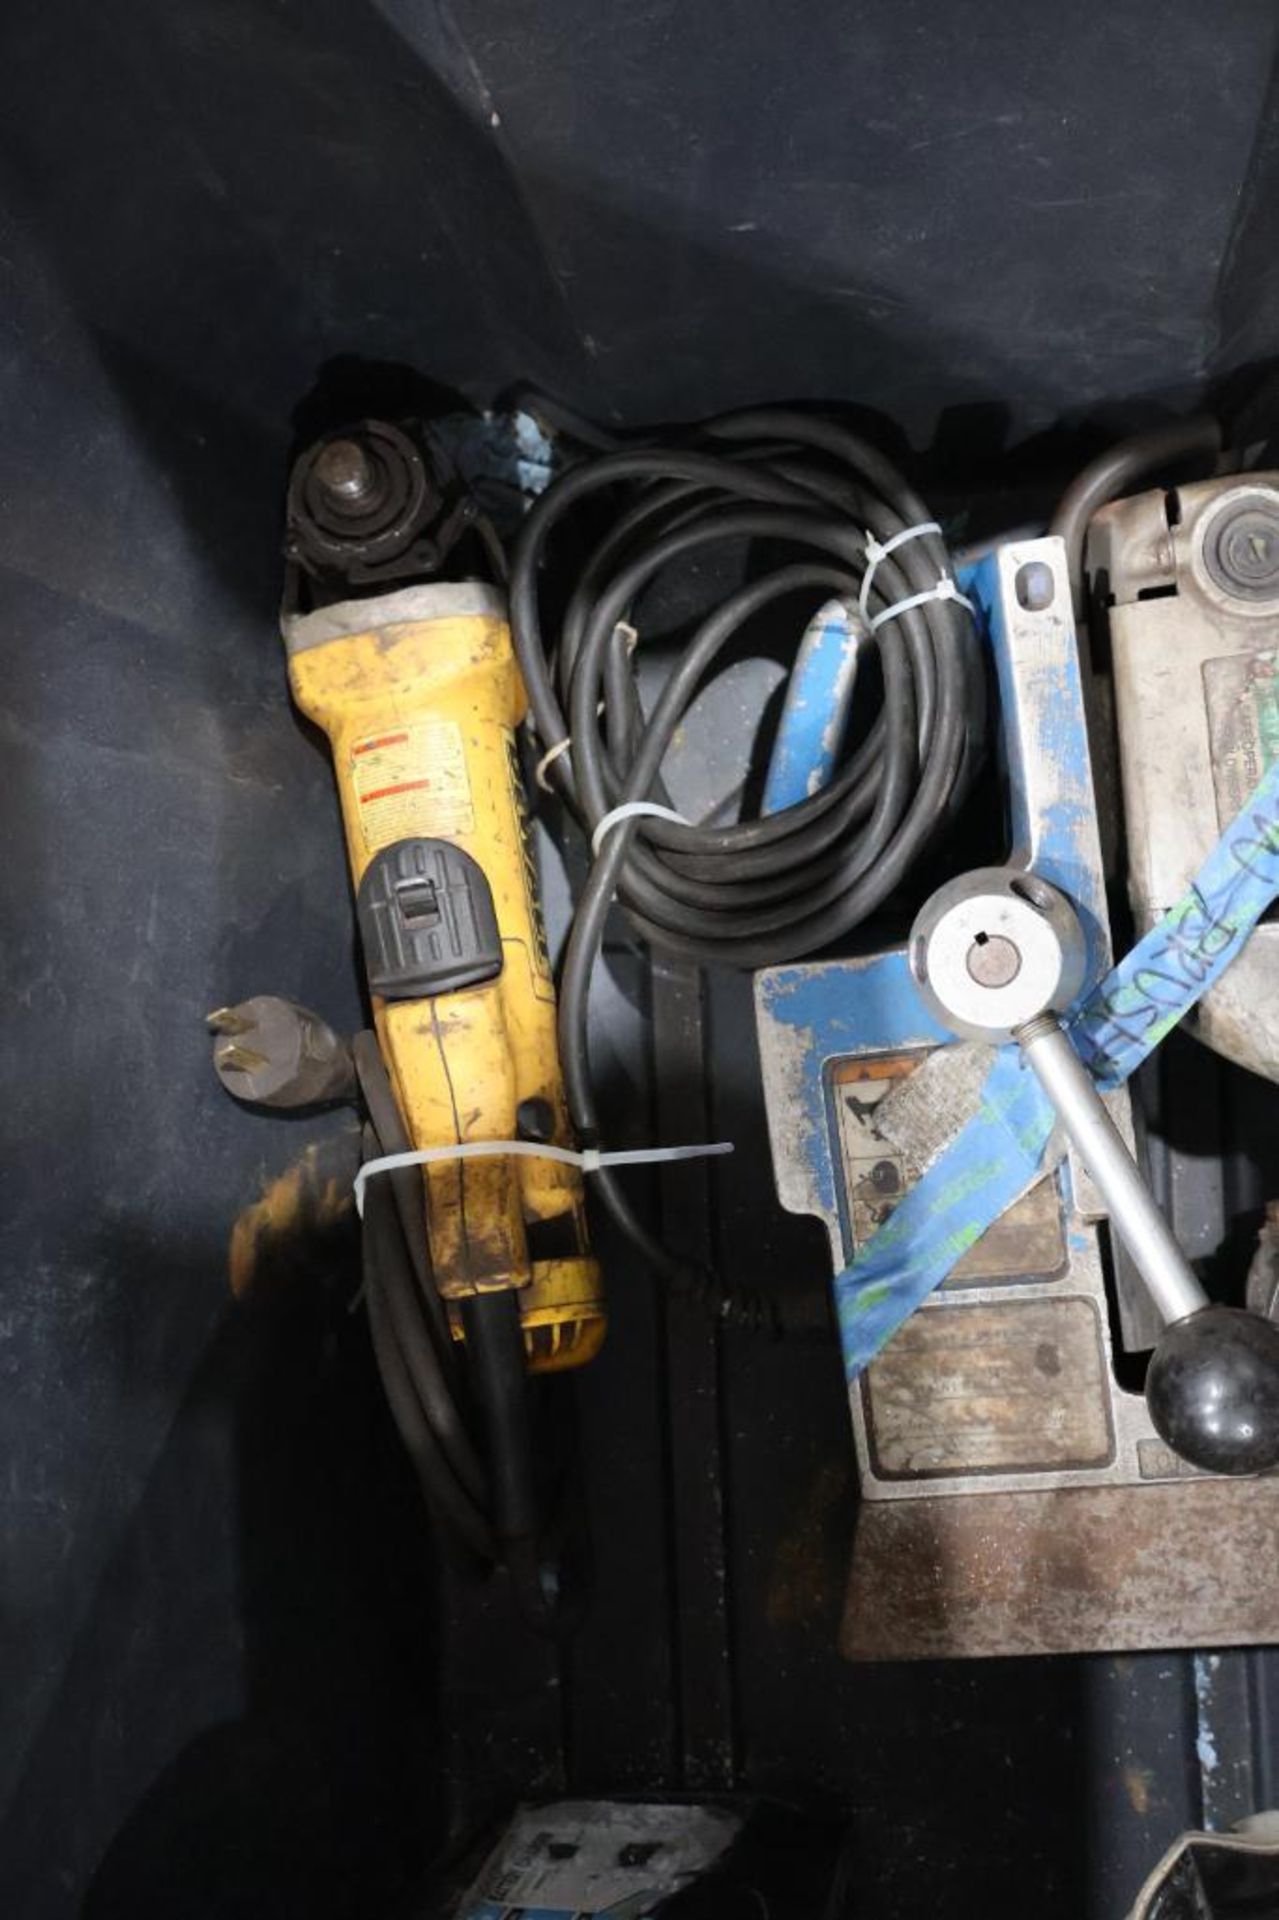 Non operational power tools - Image 4 of 7